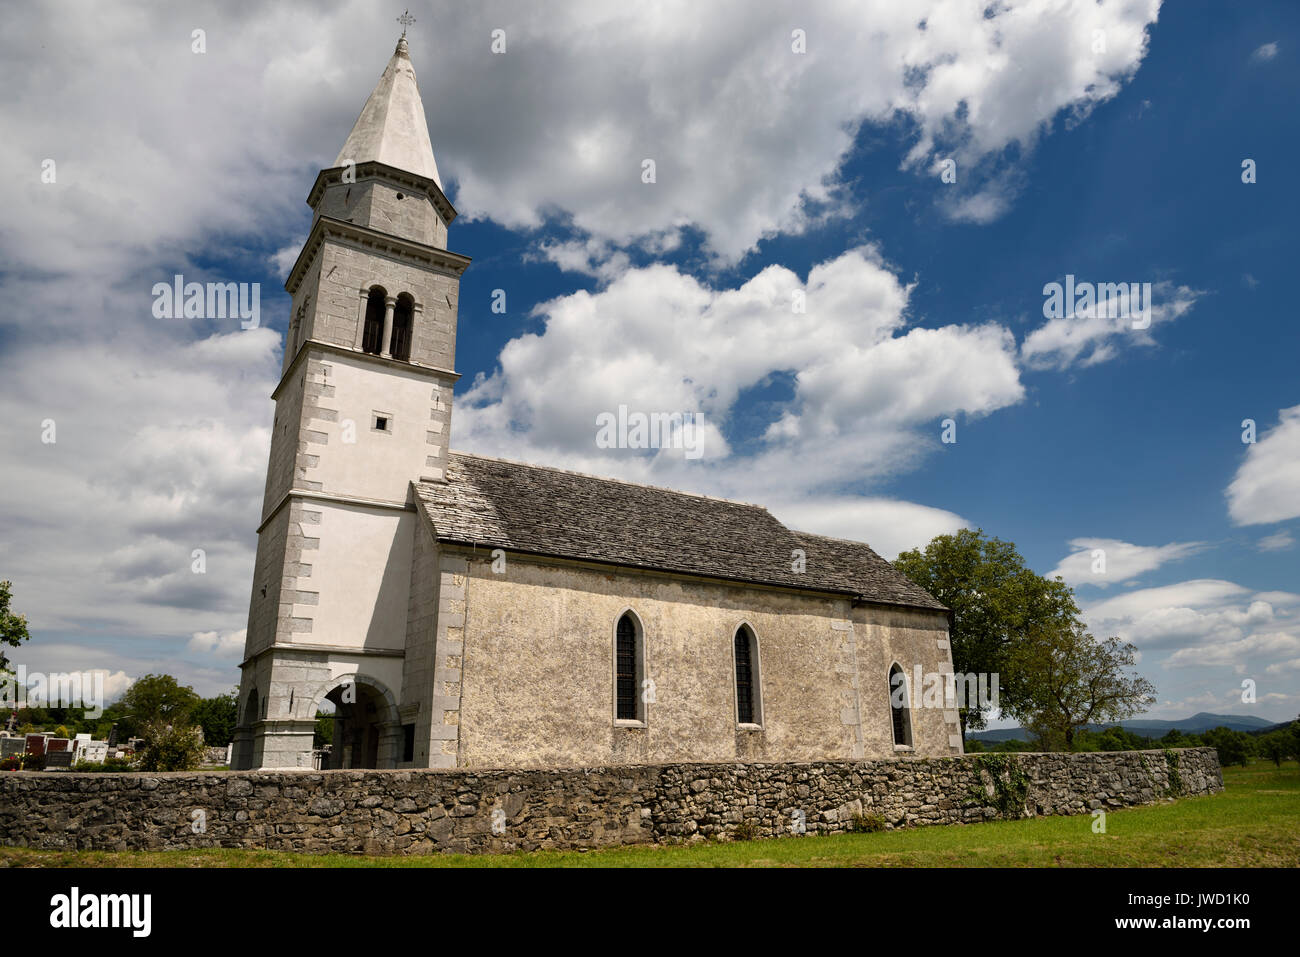 Stone tile roof of the Church of the Holy Cross of Tomaj parish next to a cemetery in Kriz Sezana Slovenia Stock Photo